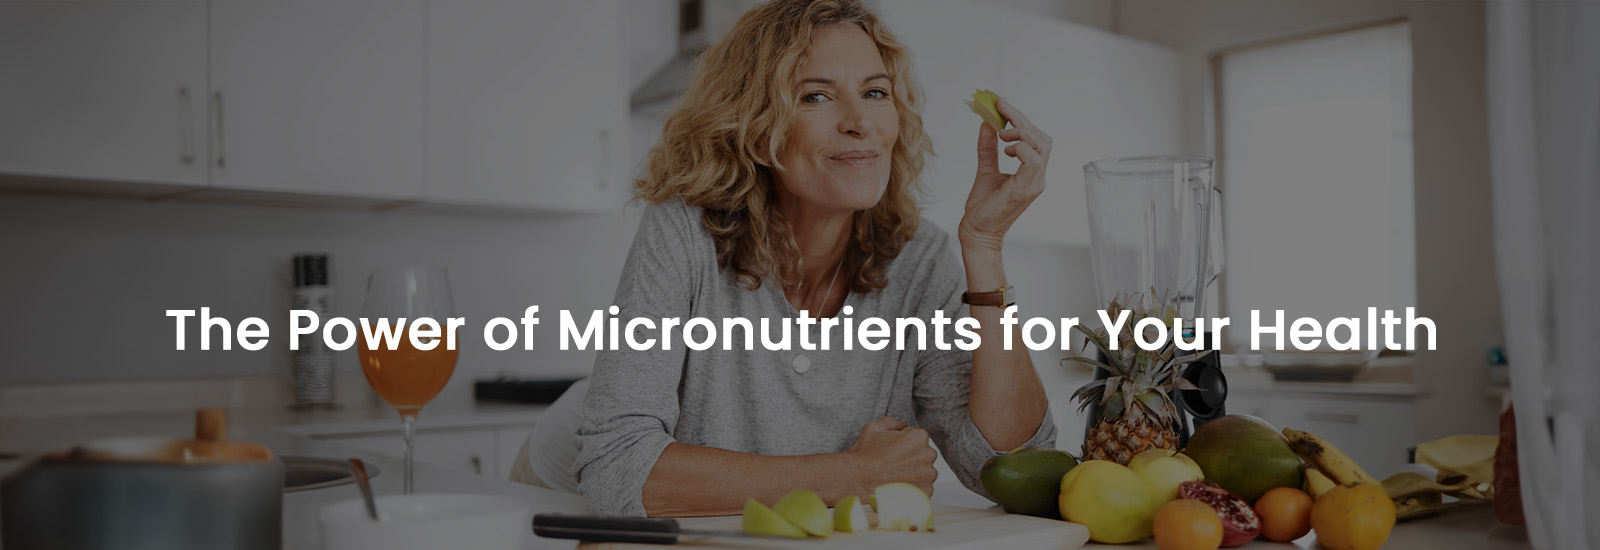 The Power of Micronutrients for Your Health | Banner Image